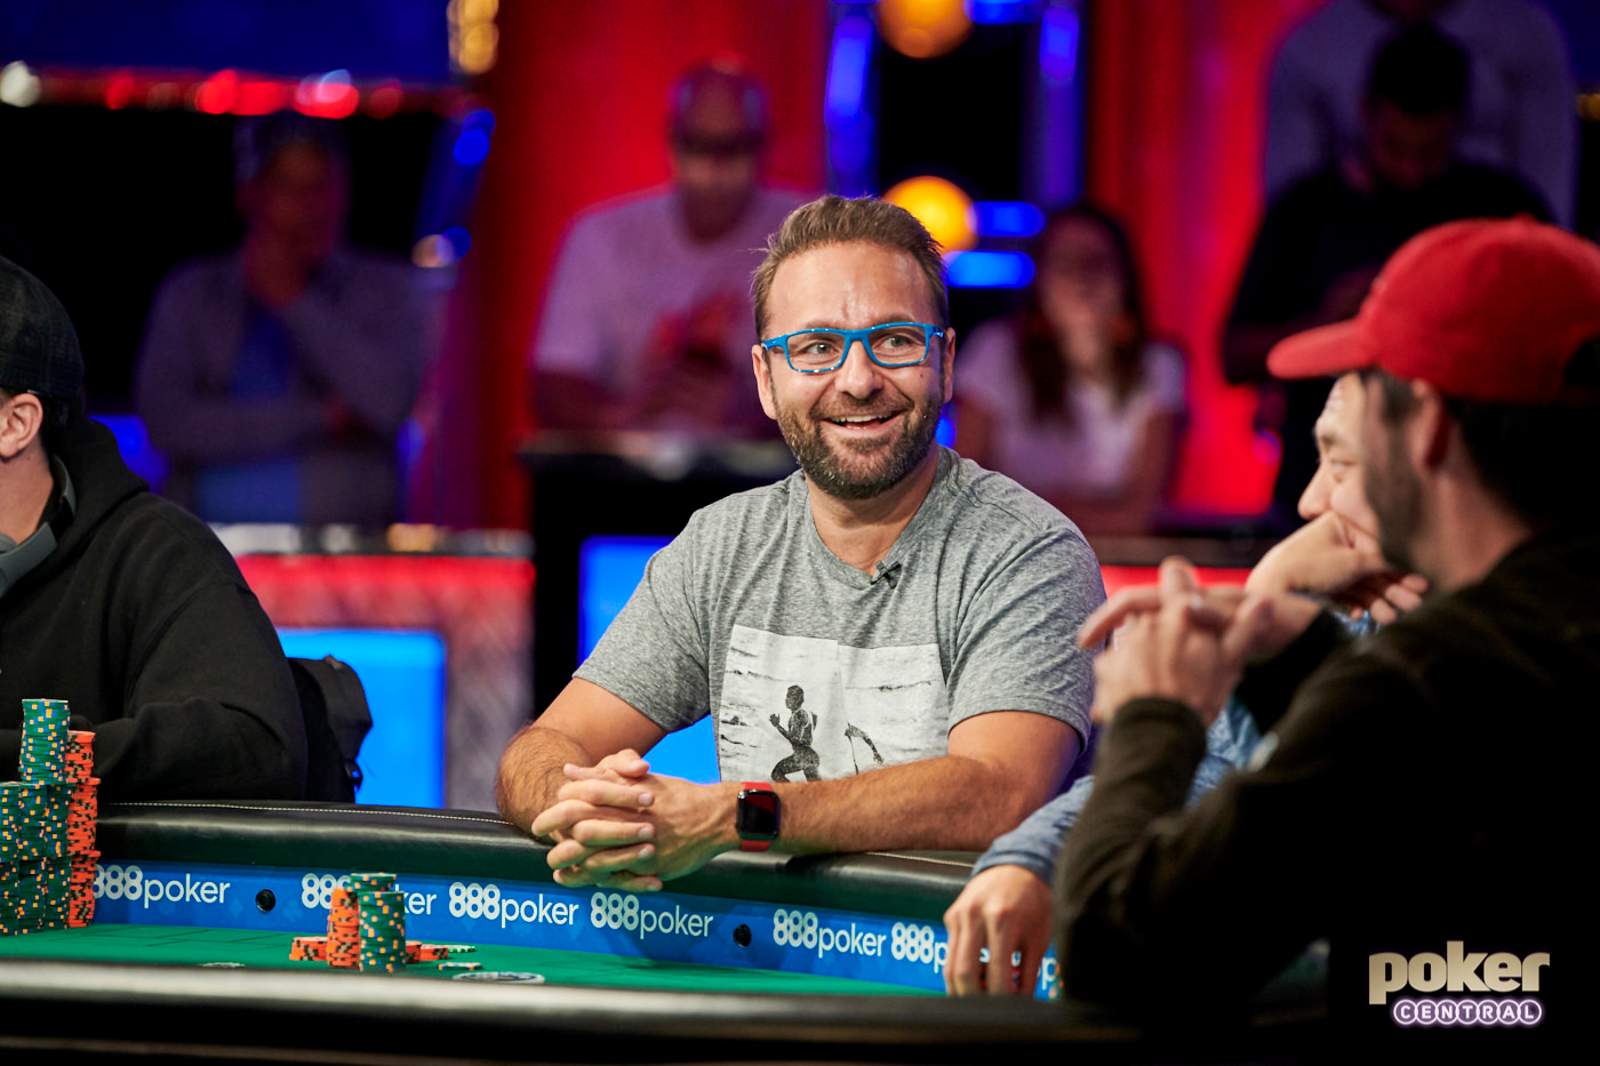 Luke Schwartz's Louis Vuitton Bag Full of Dollars, Negreanu's Lessons Pay Off, and Vornicu vs Gagliano Drama